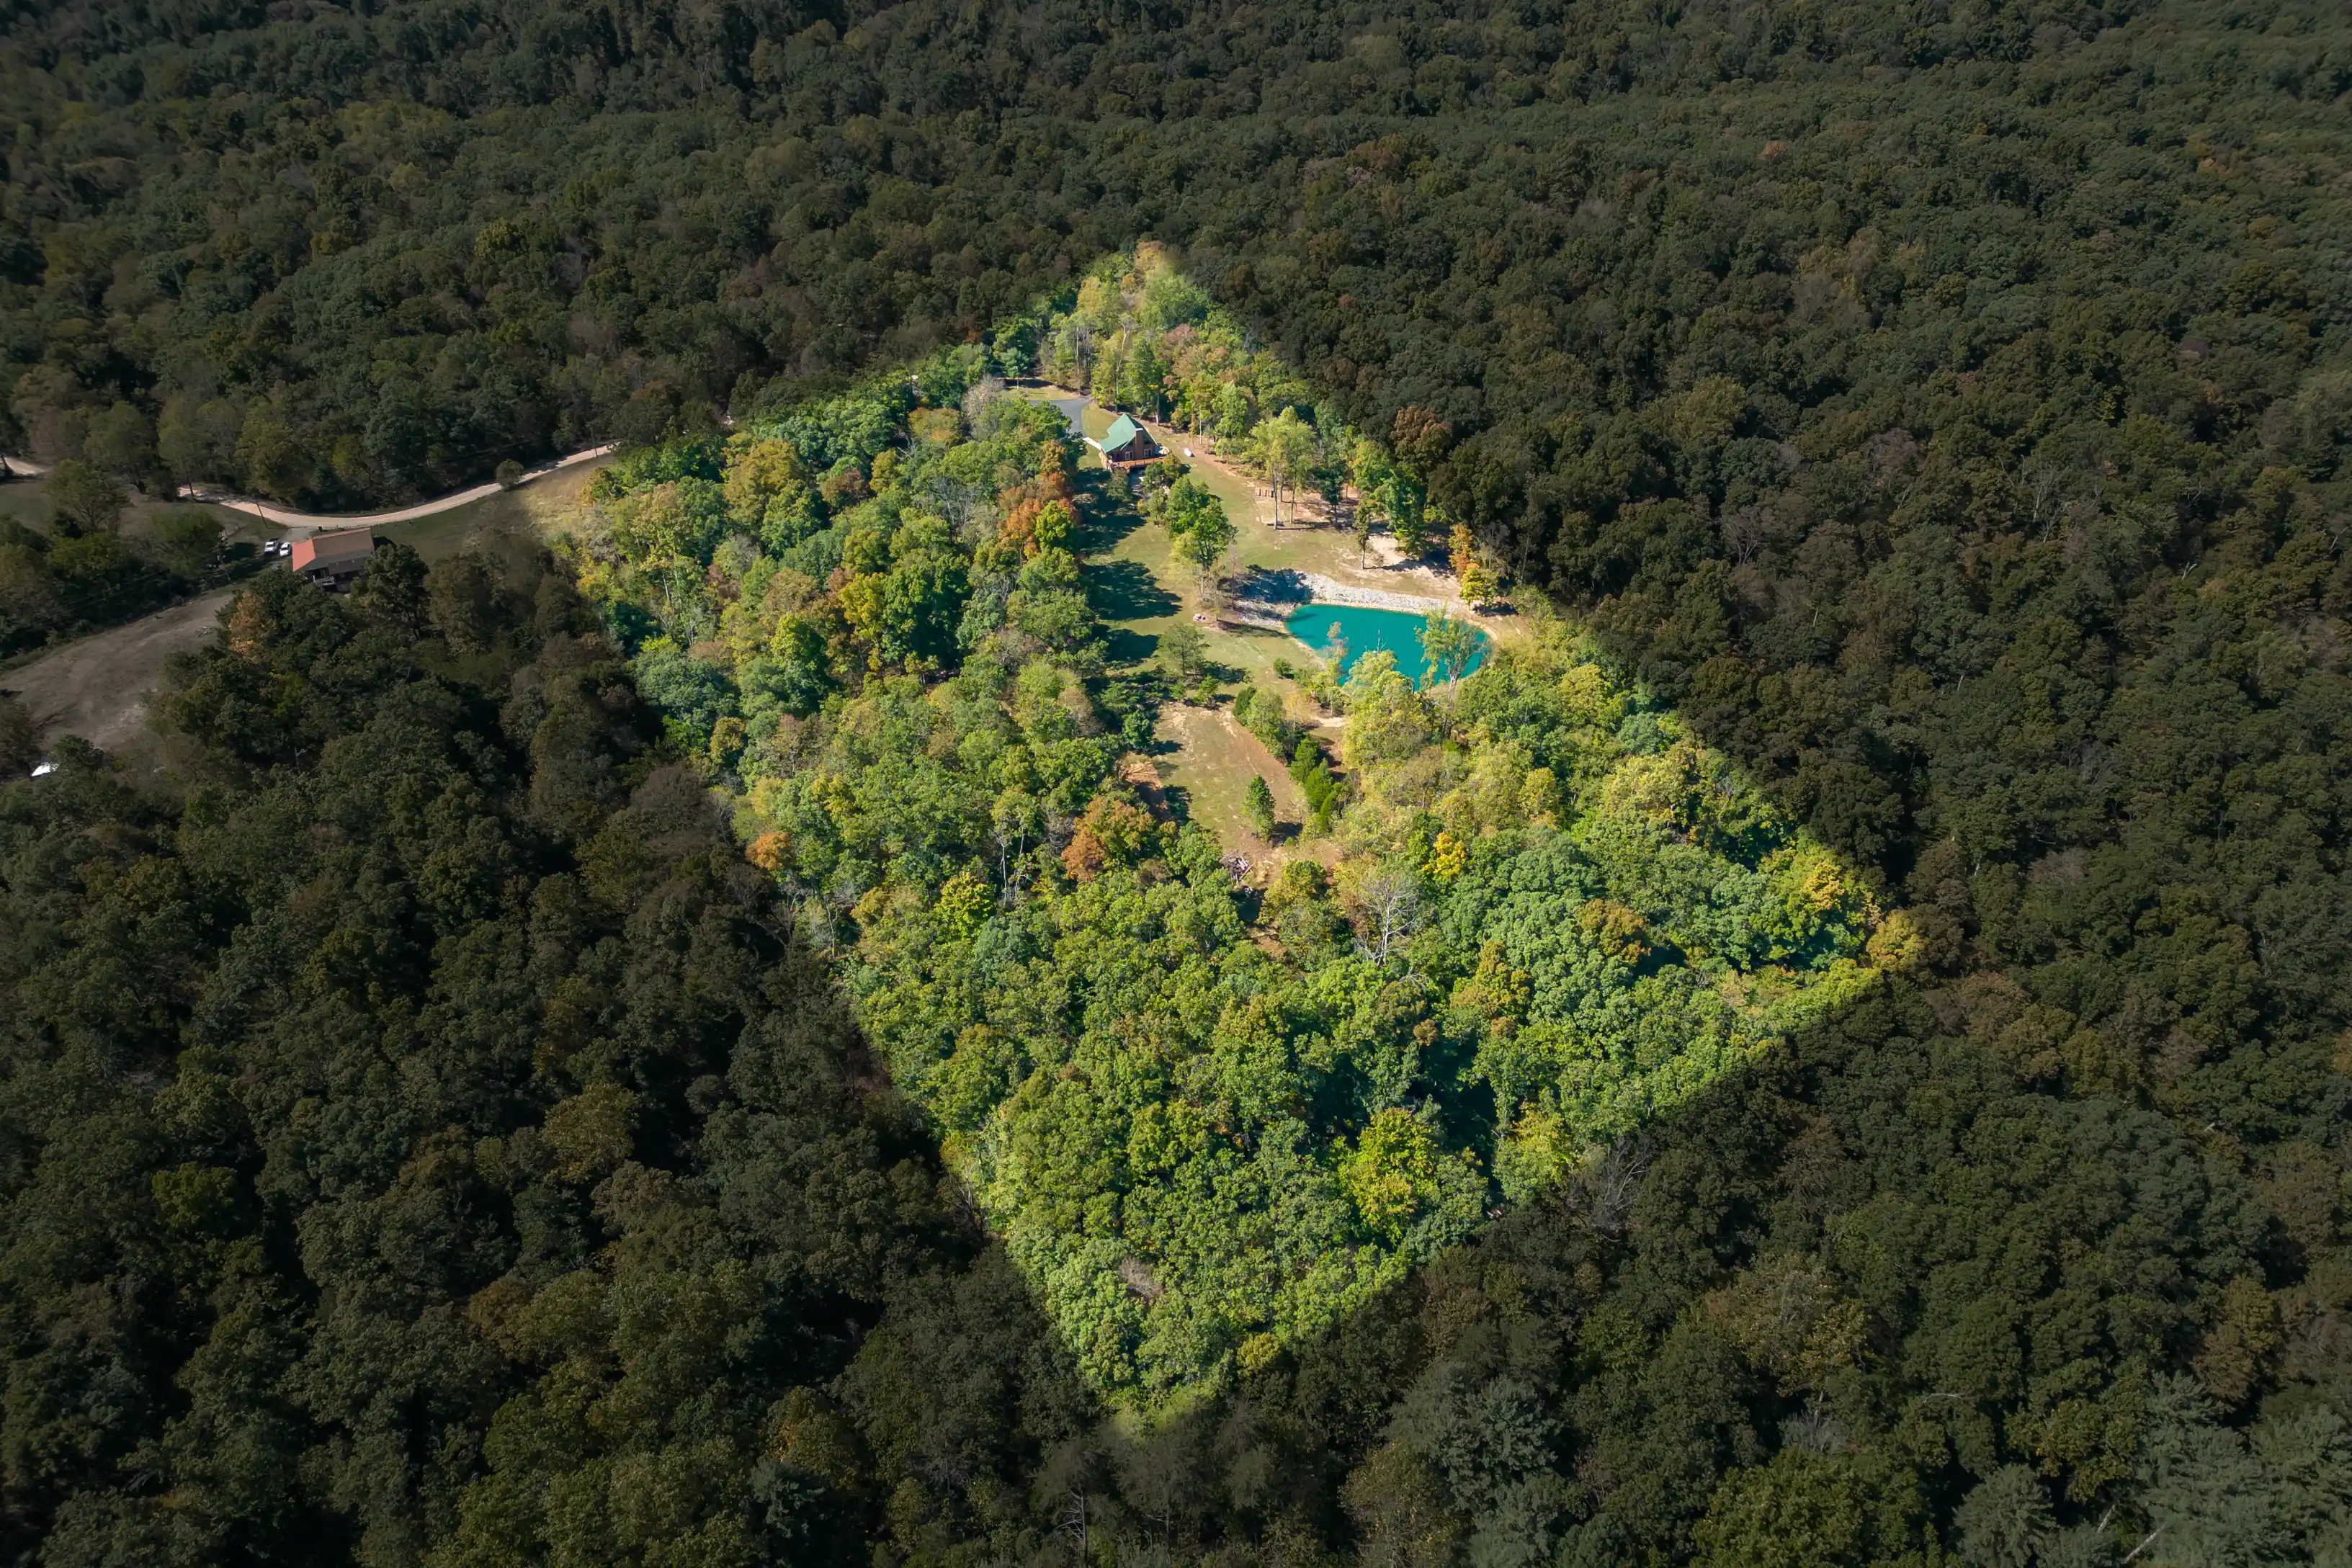 Aerial view of a forested area with a clearing containing buildings and a small pond.